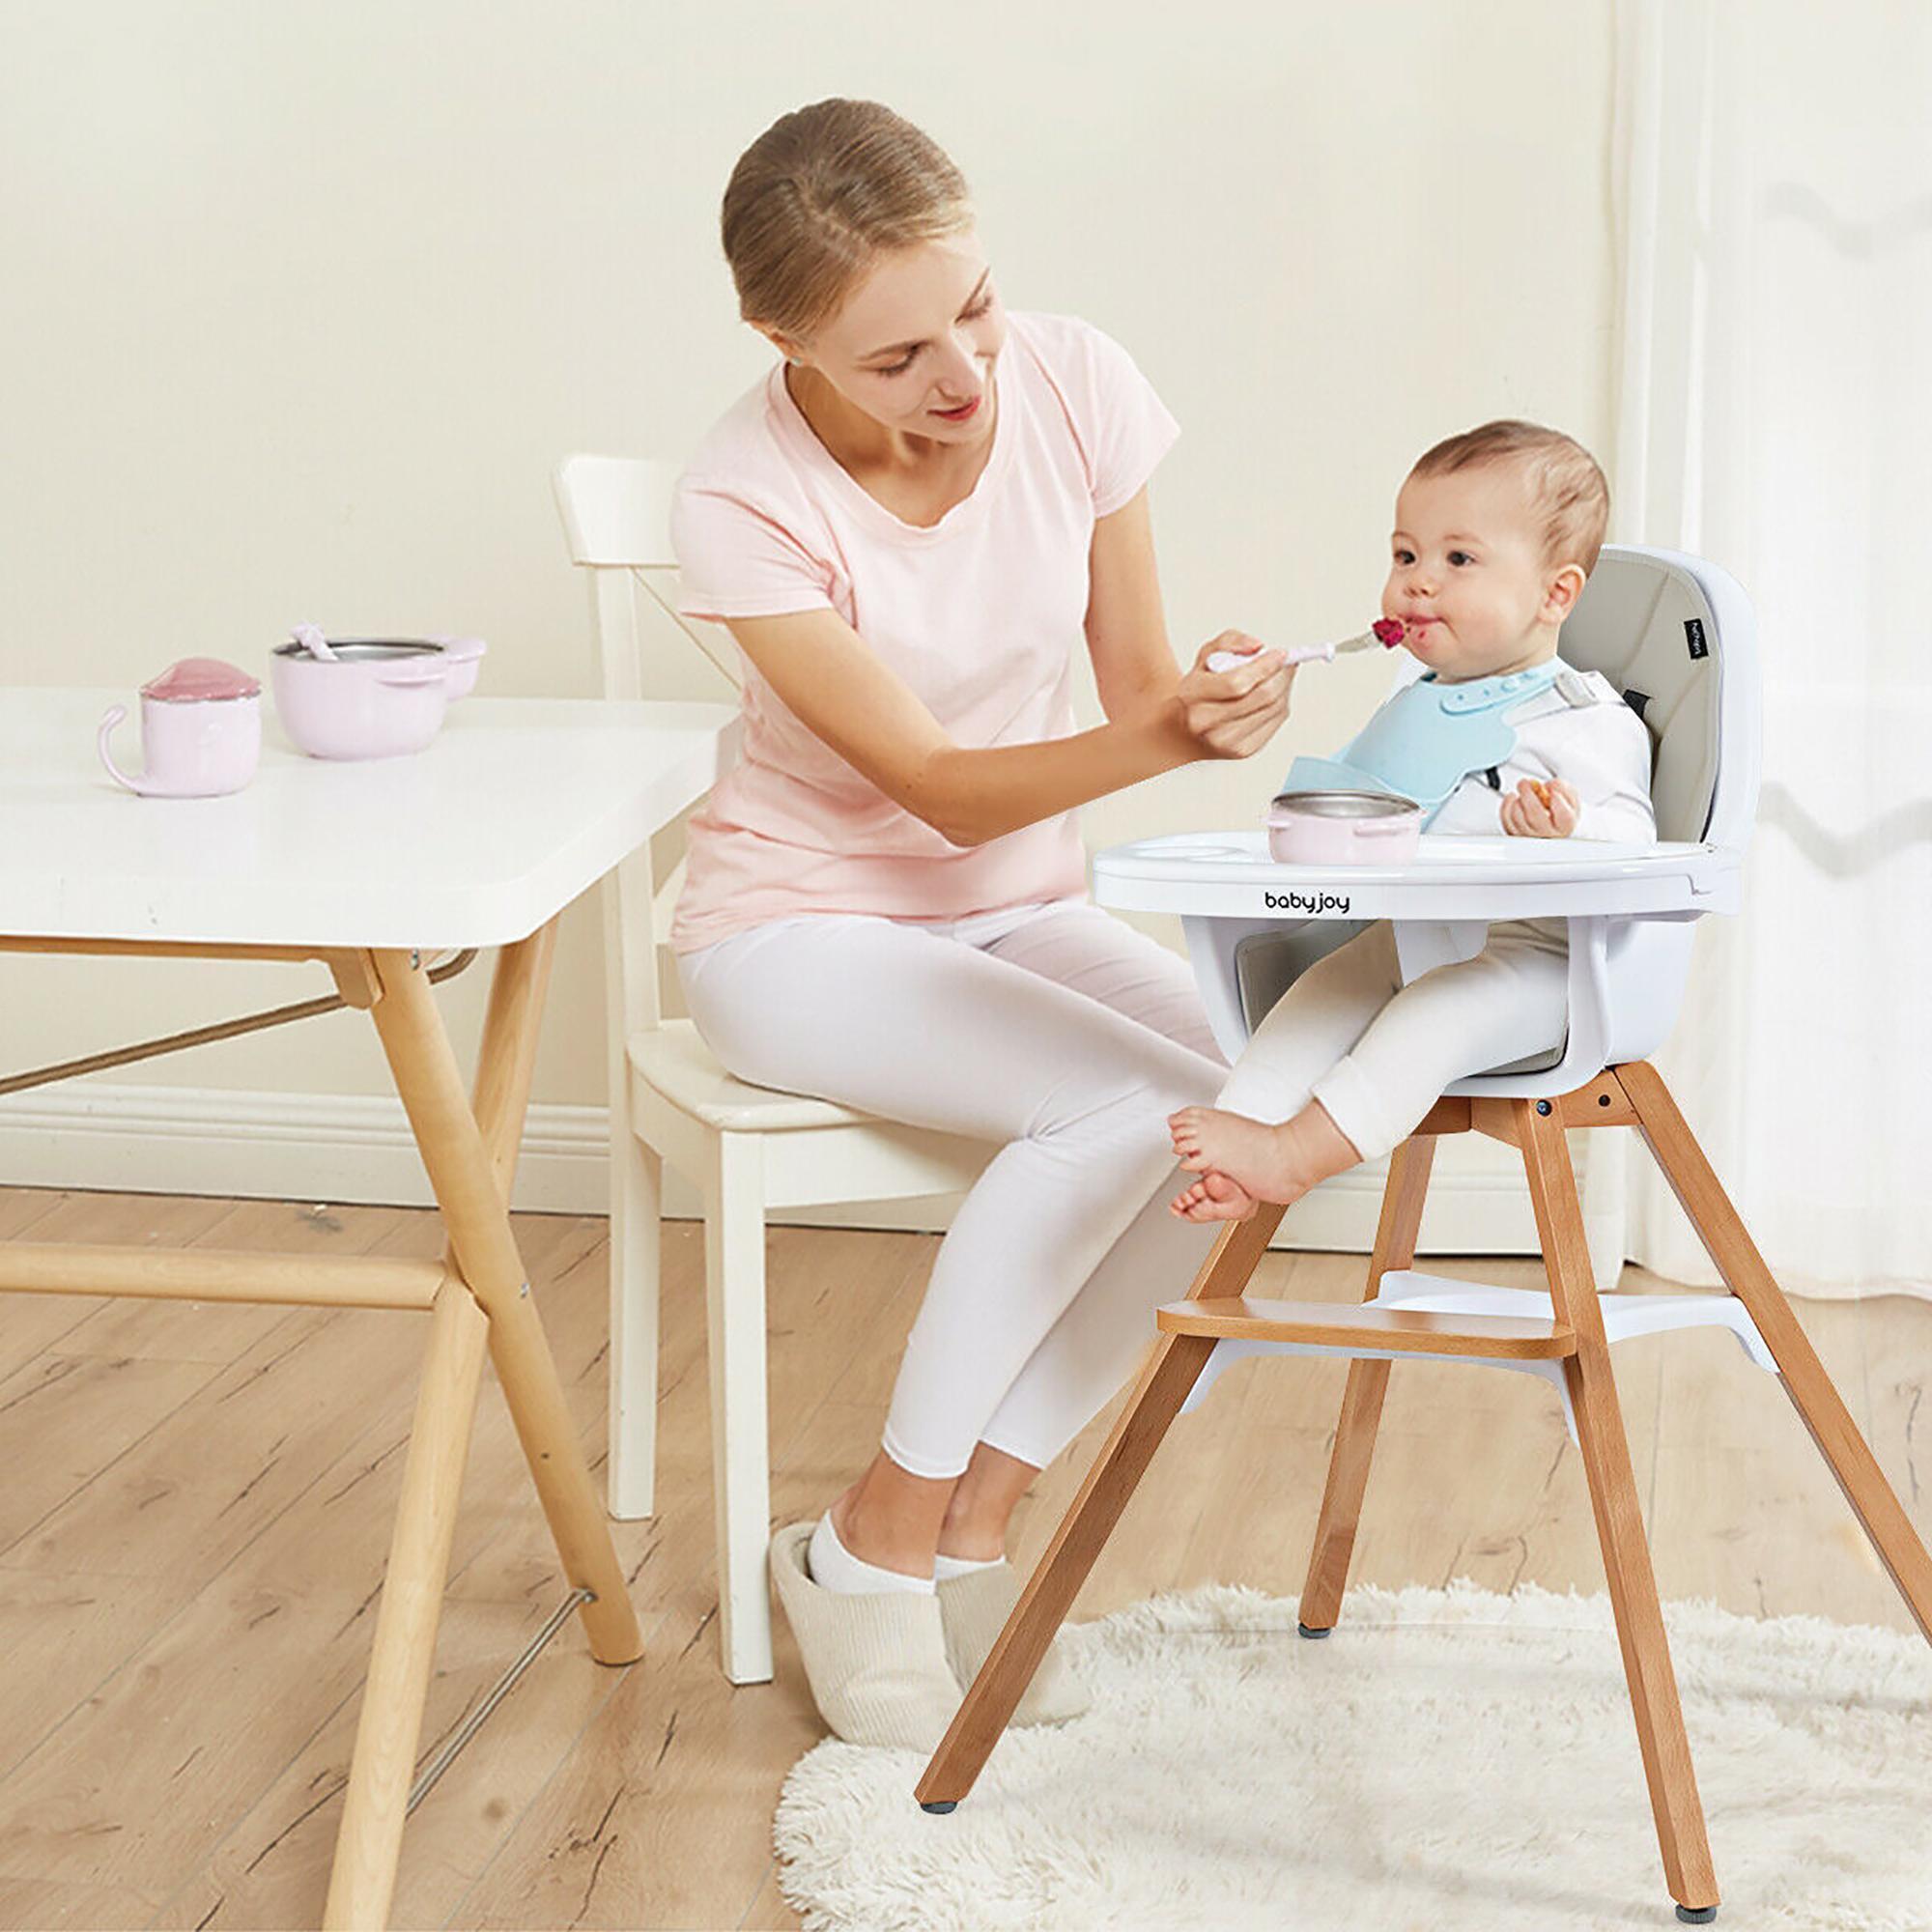 Costway 3-in-1 Convertible Wooden Baby High Chair w/ Tray Adjustable Legs Cushion Gray\ Beige alternate image